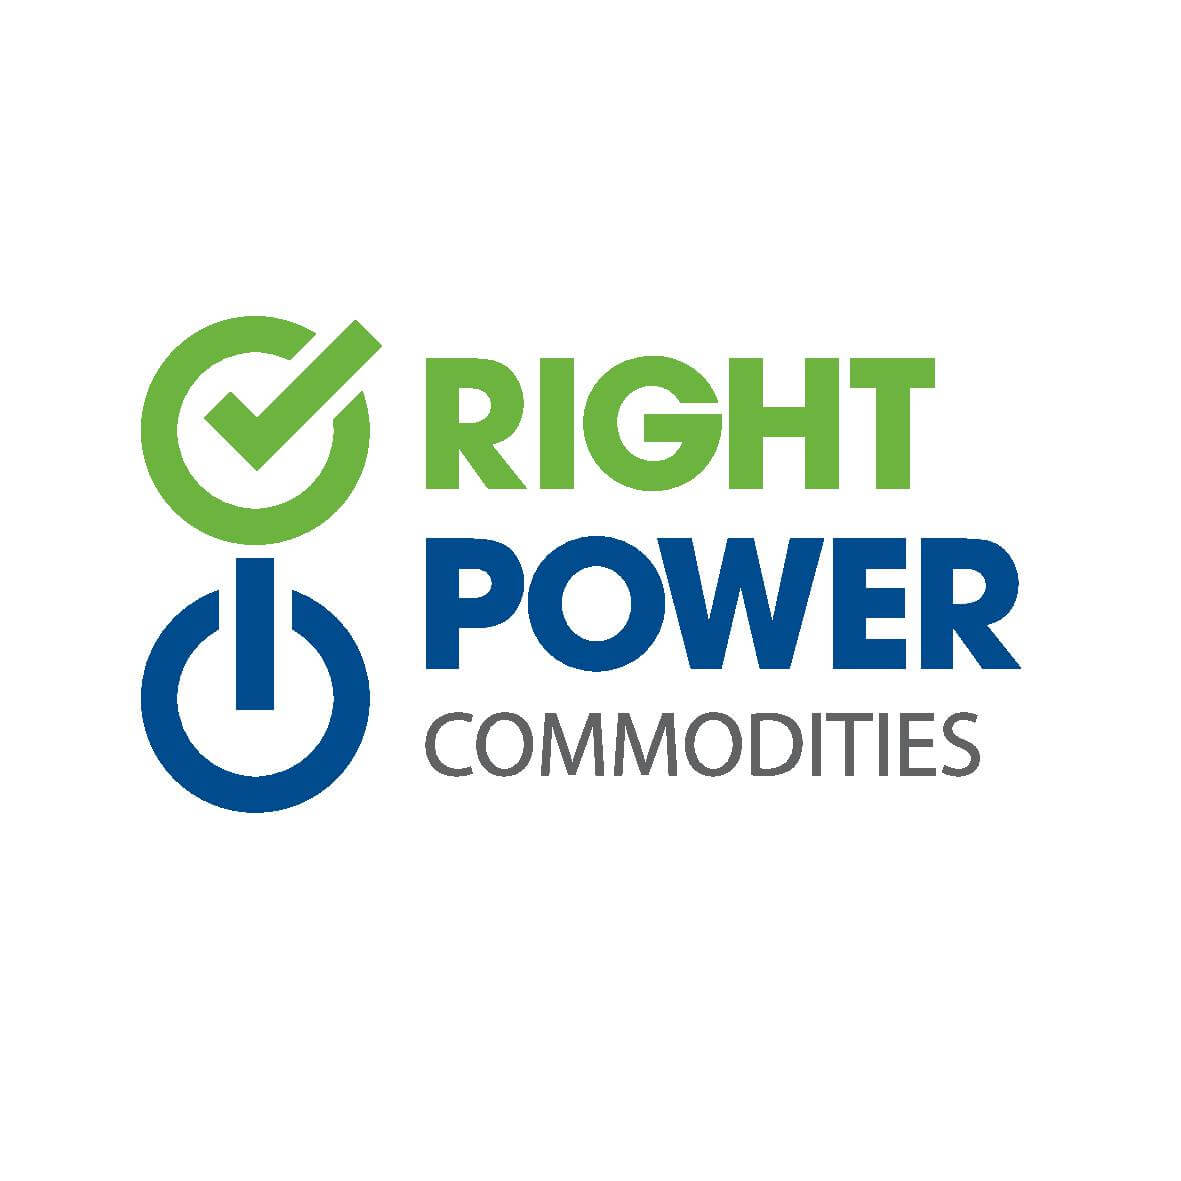 RIGHT POWER COMMODITIES, s.r.o.